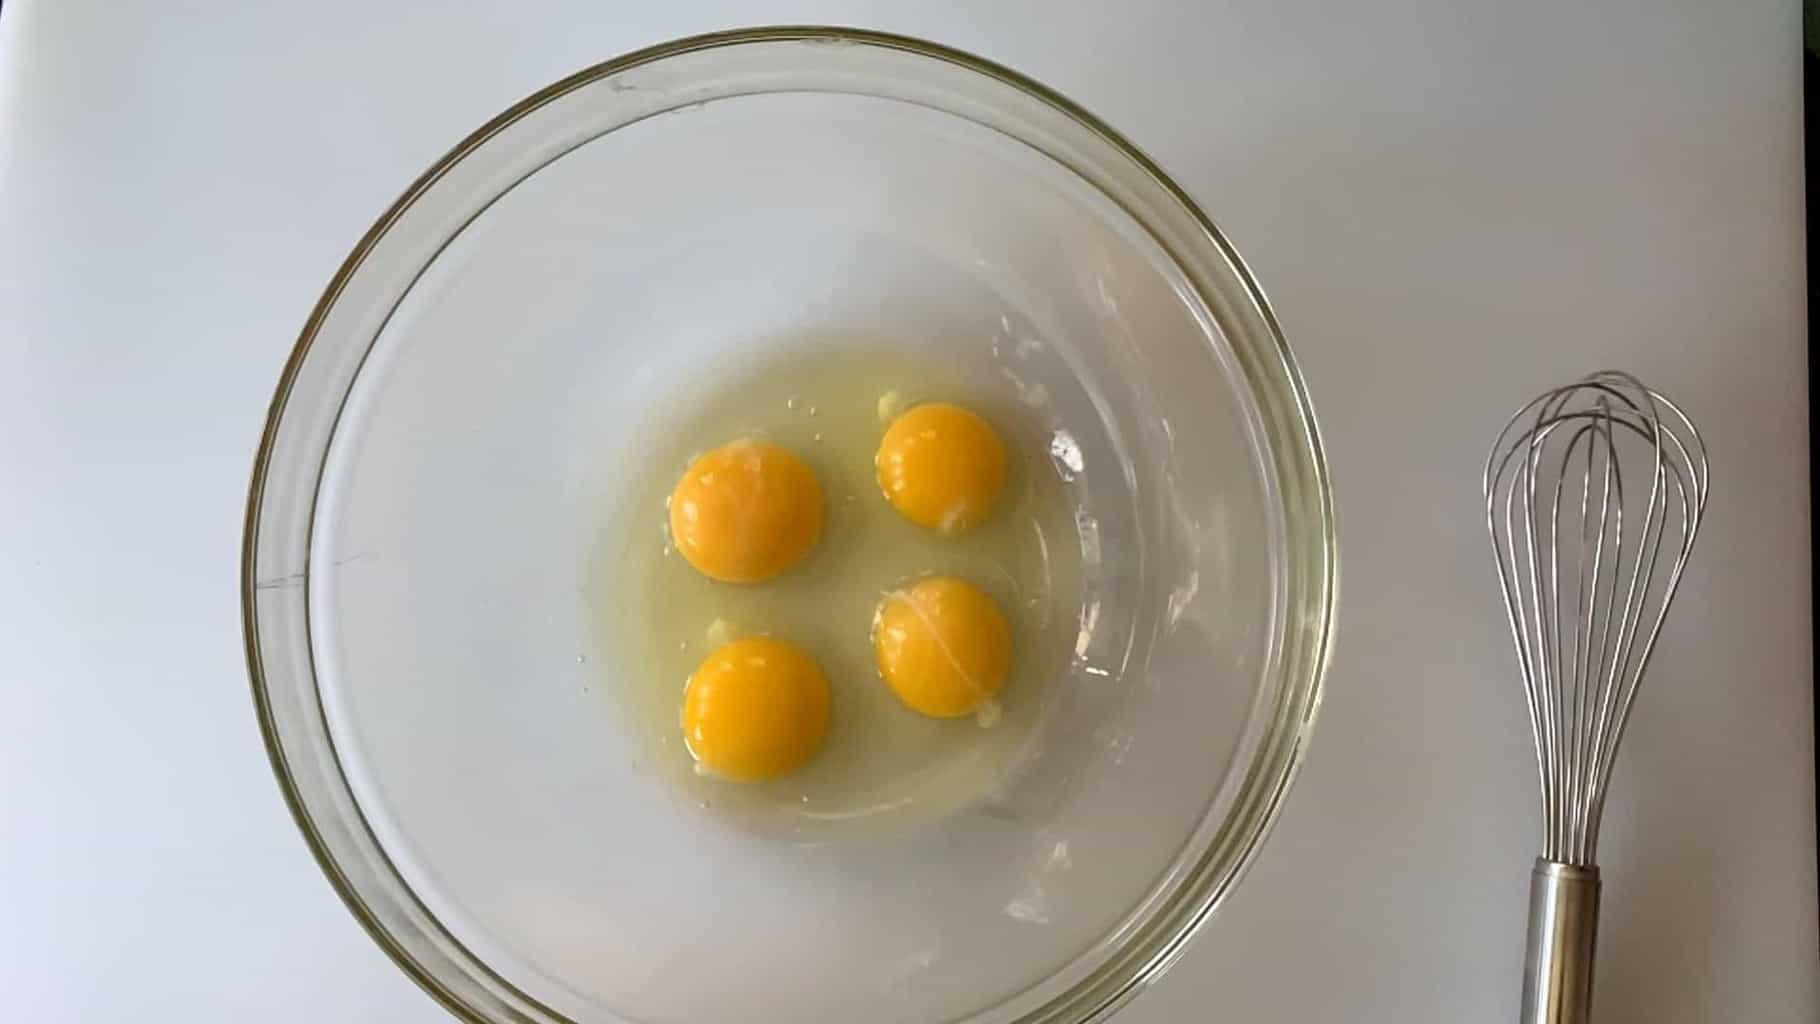 4 eggs in a bowl.